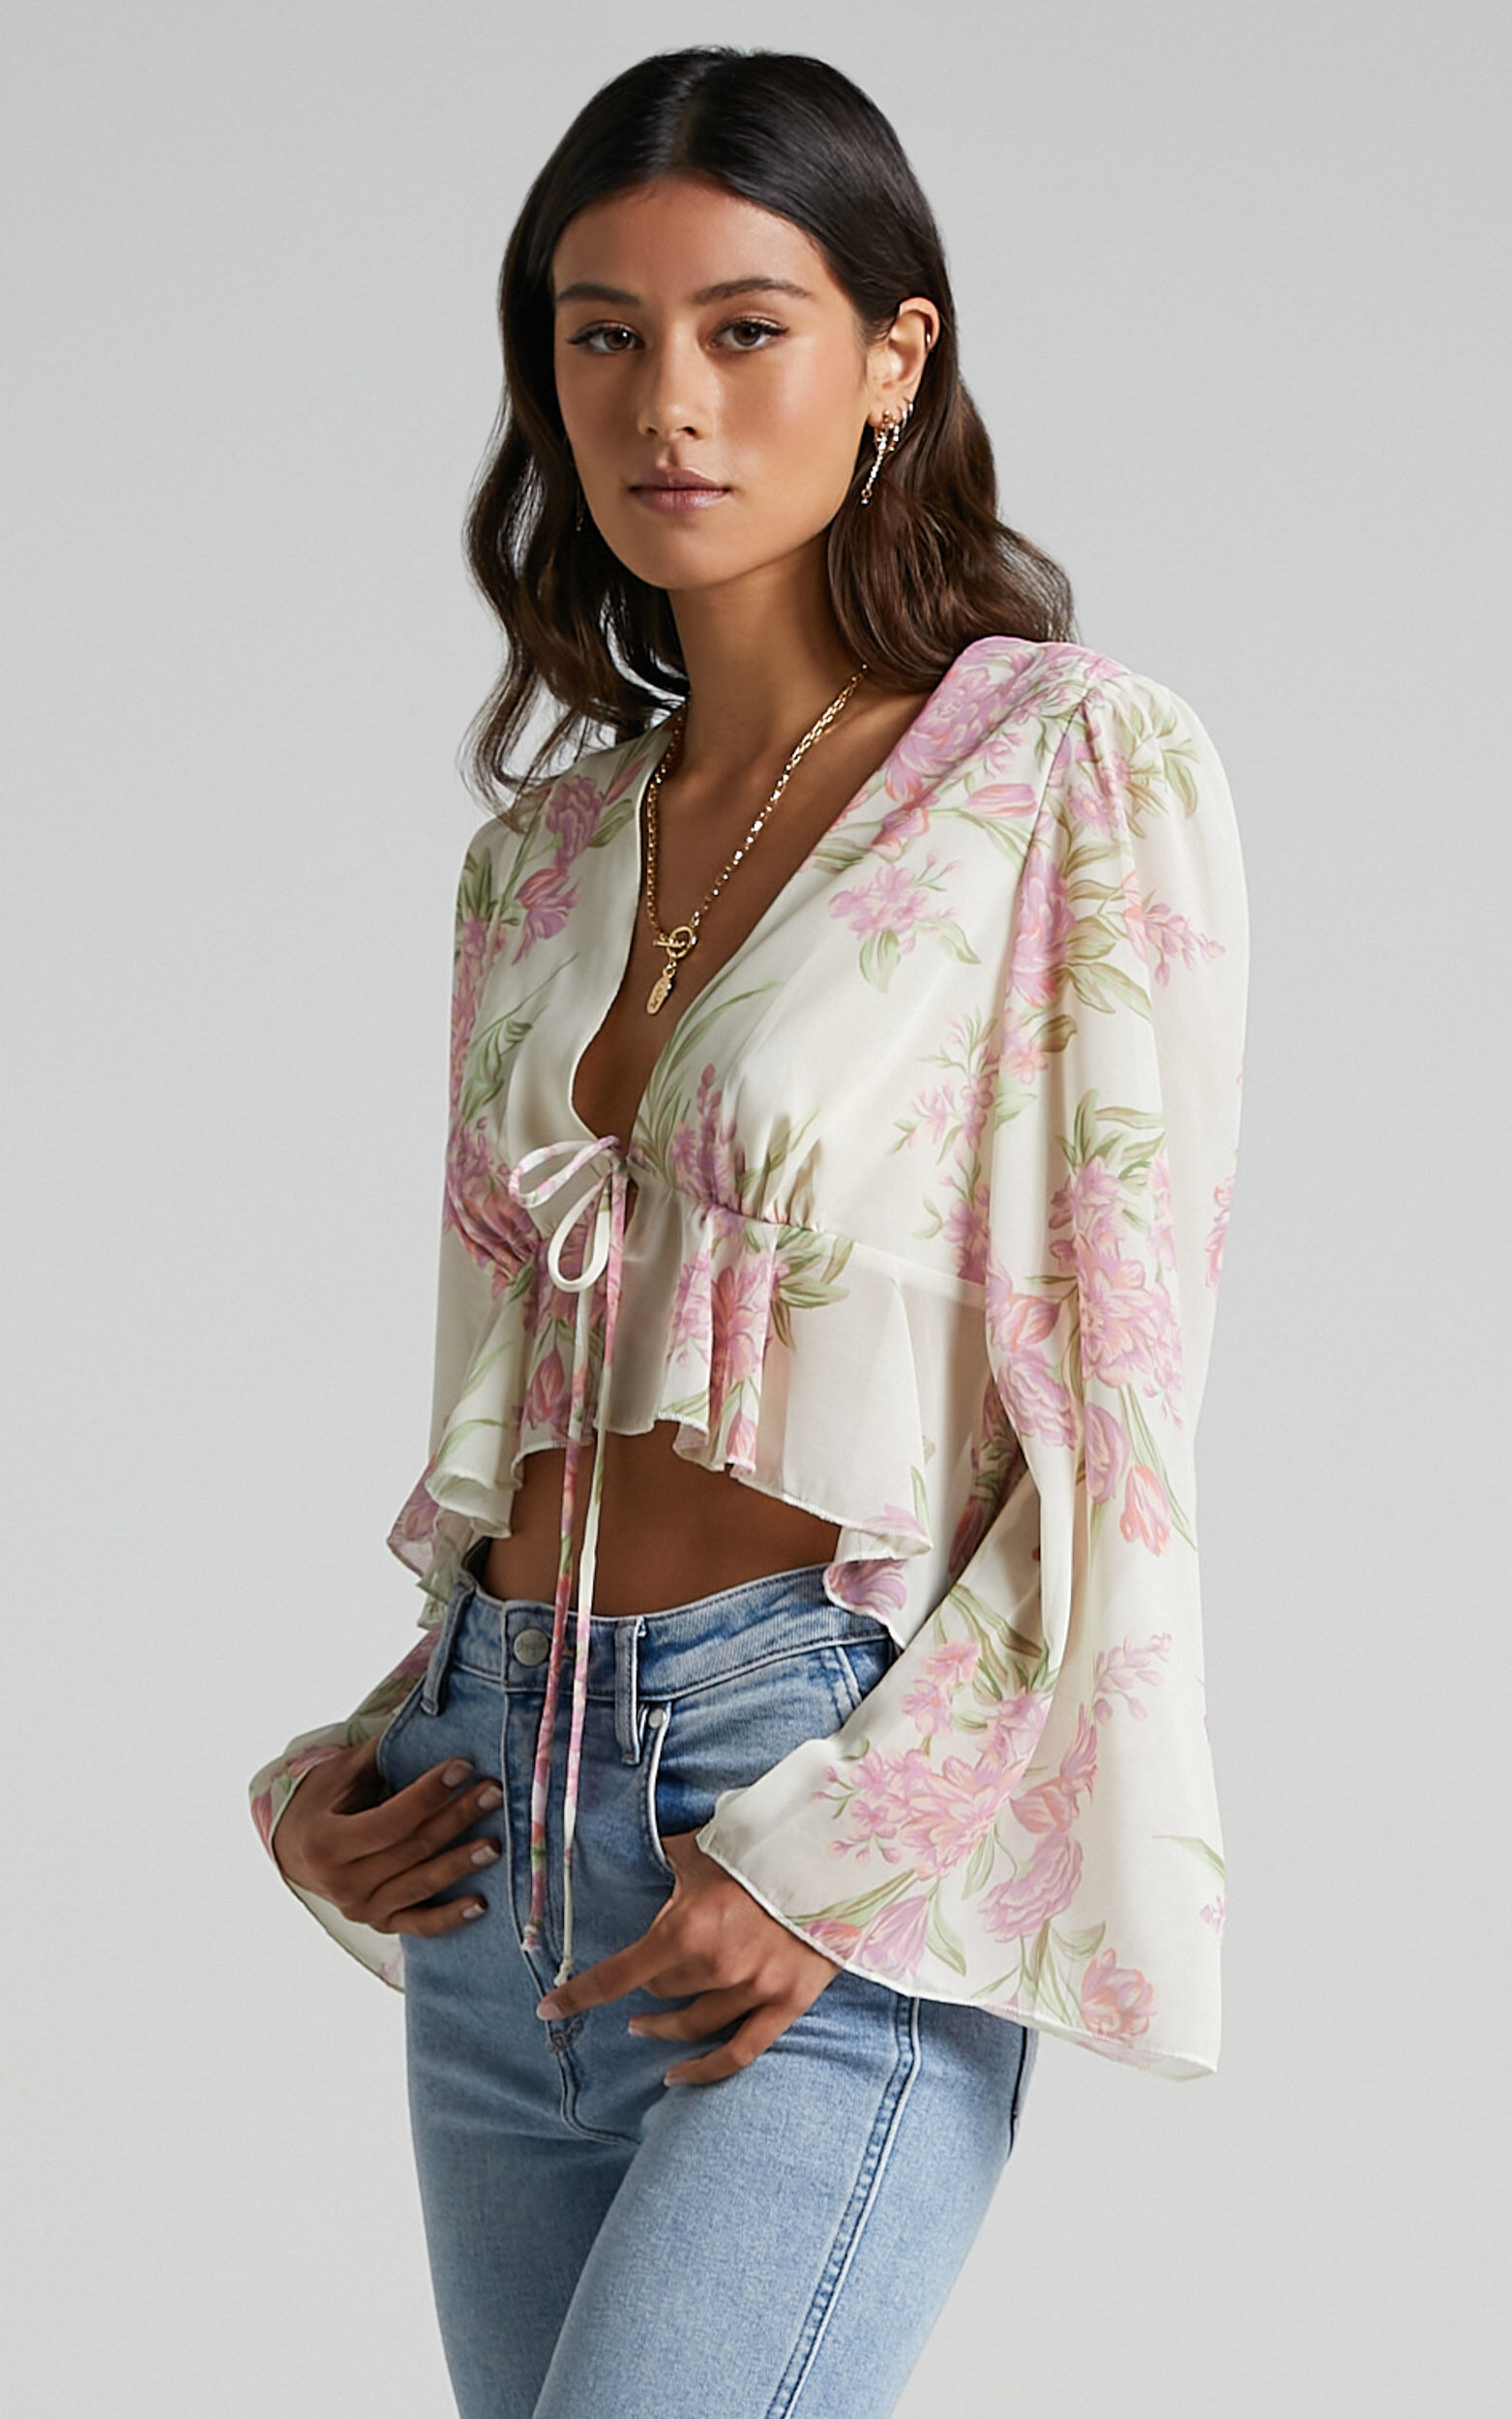 Dance It Out Top in Cream Floral | Showpo USA